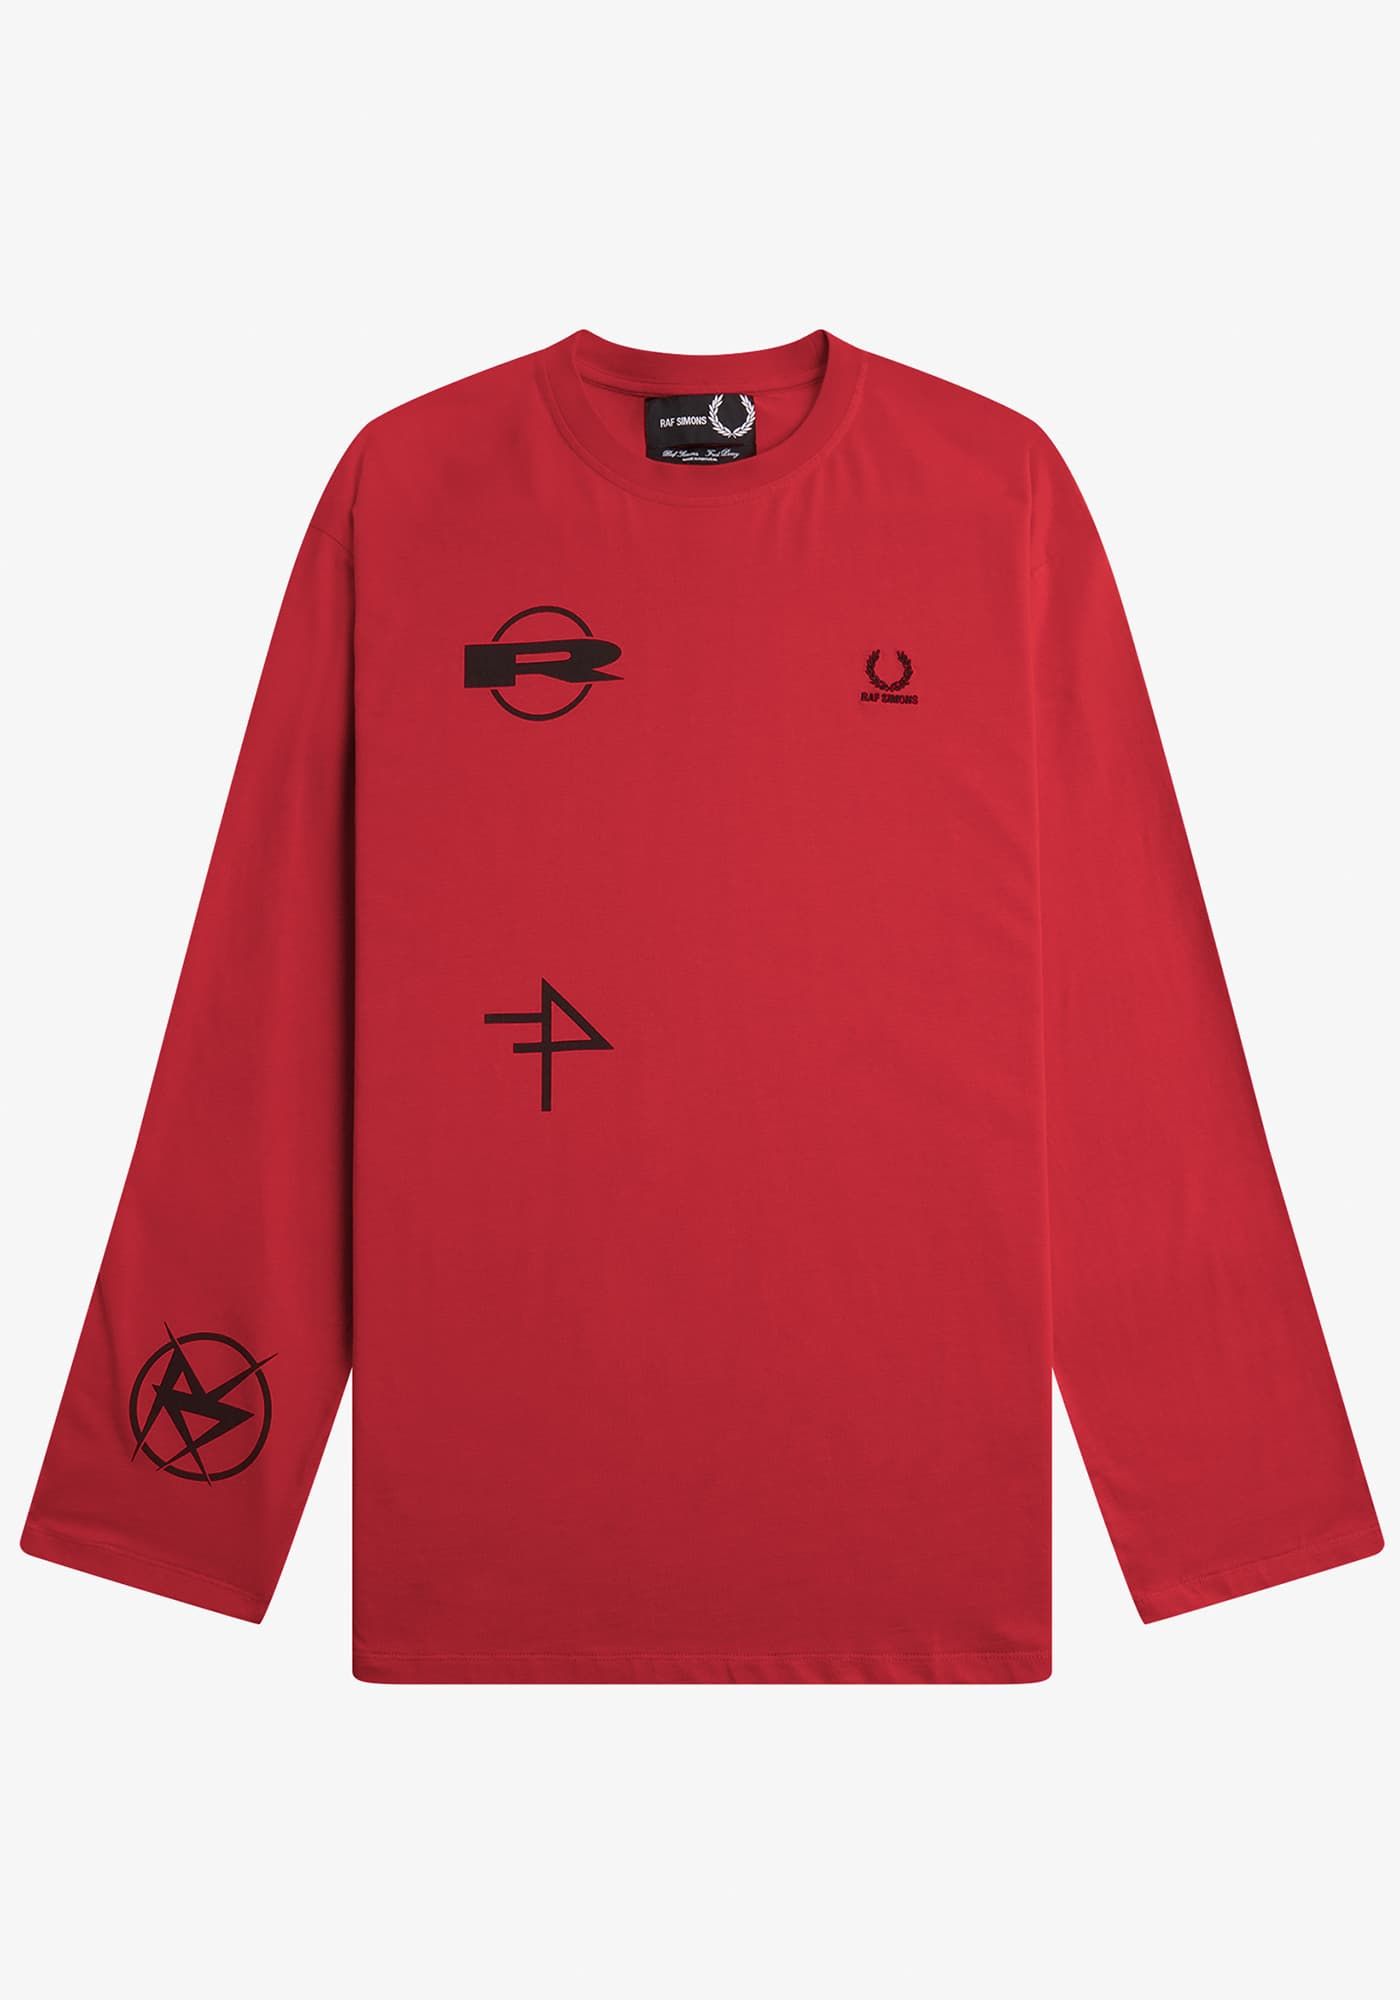 RAF SIMONS×FRED PERRY - Printed Long Sleeve T-Shirt | ALTERFATE